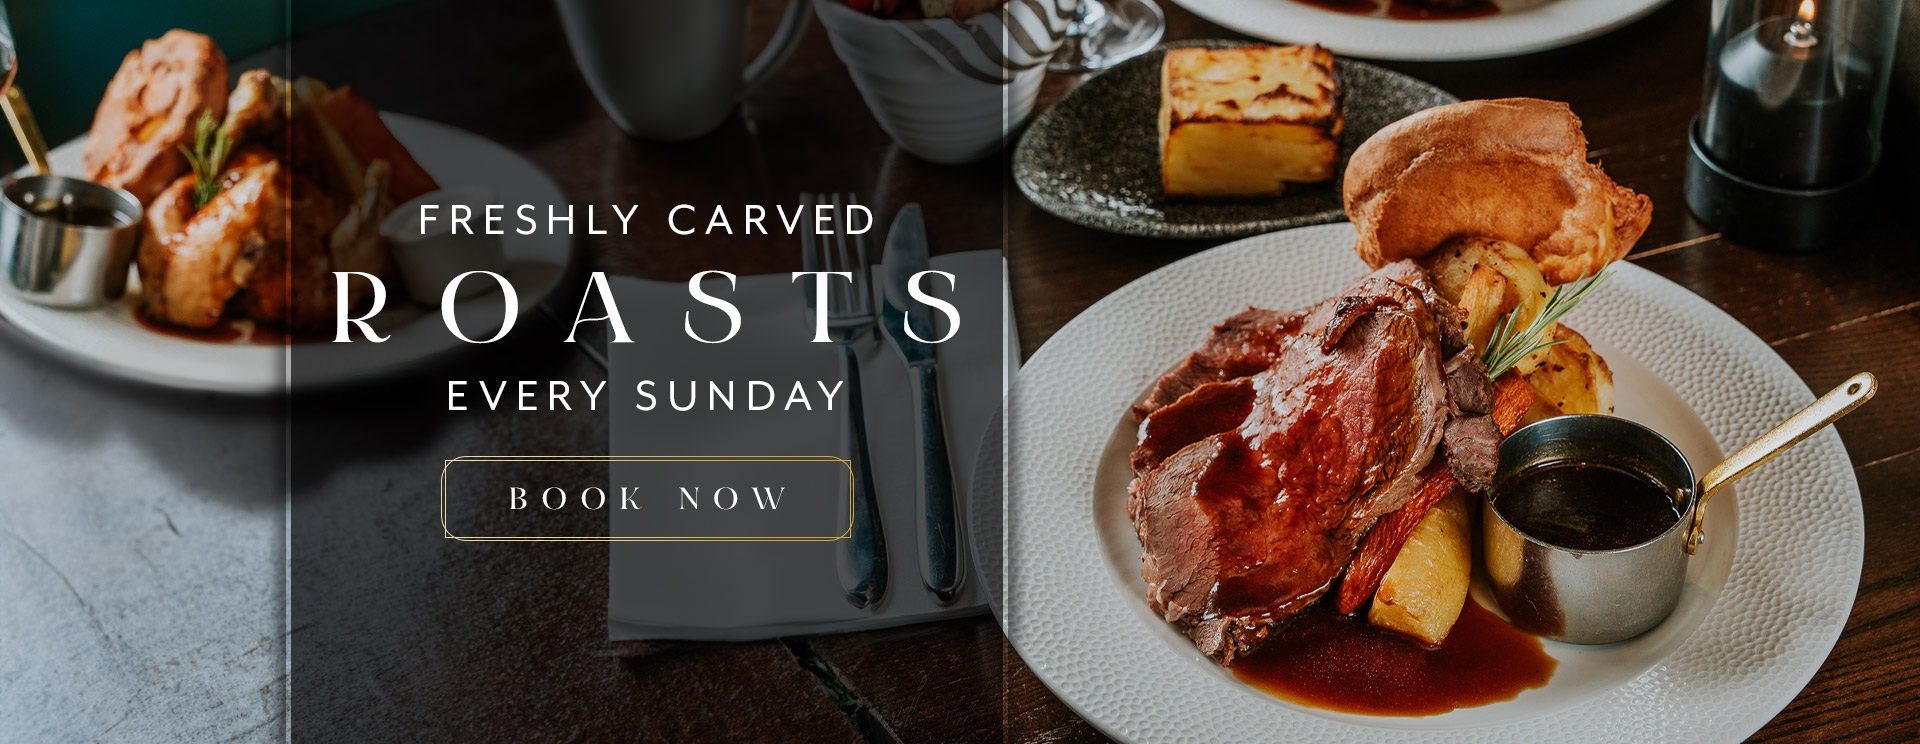 Sunday Lunch at The Marchmont Arms